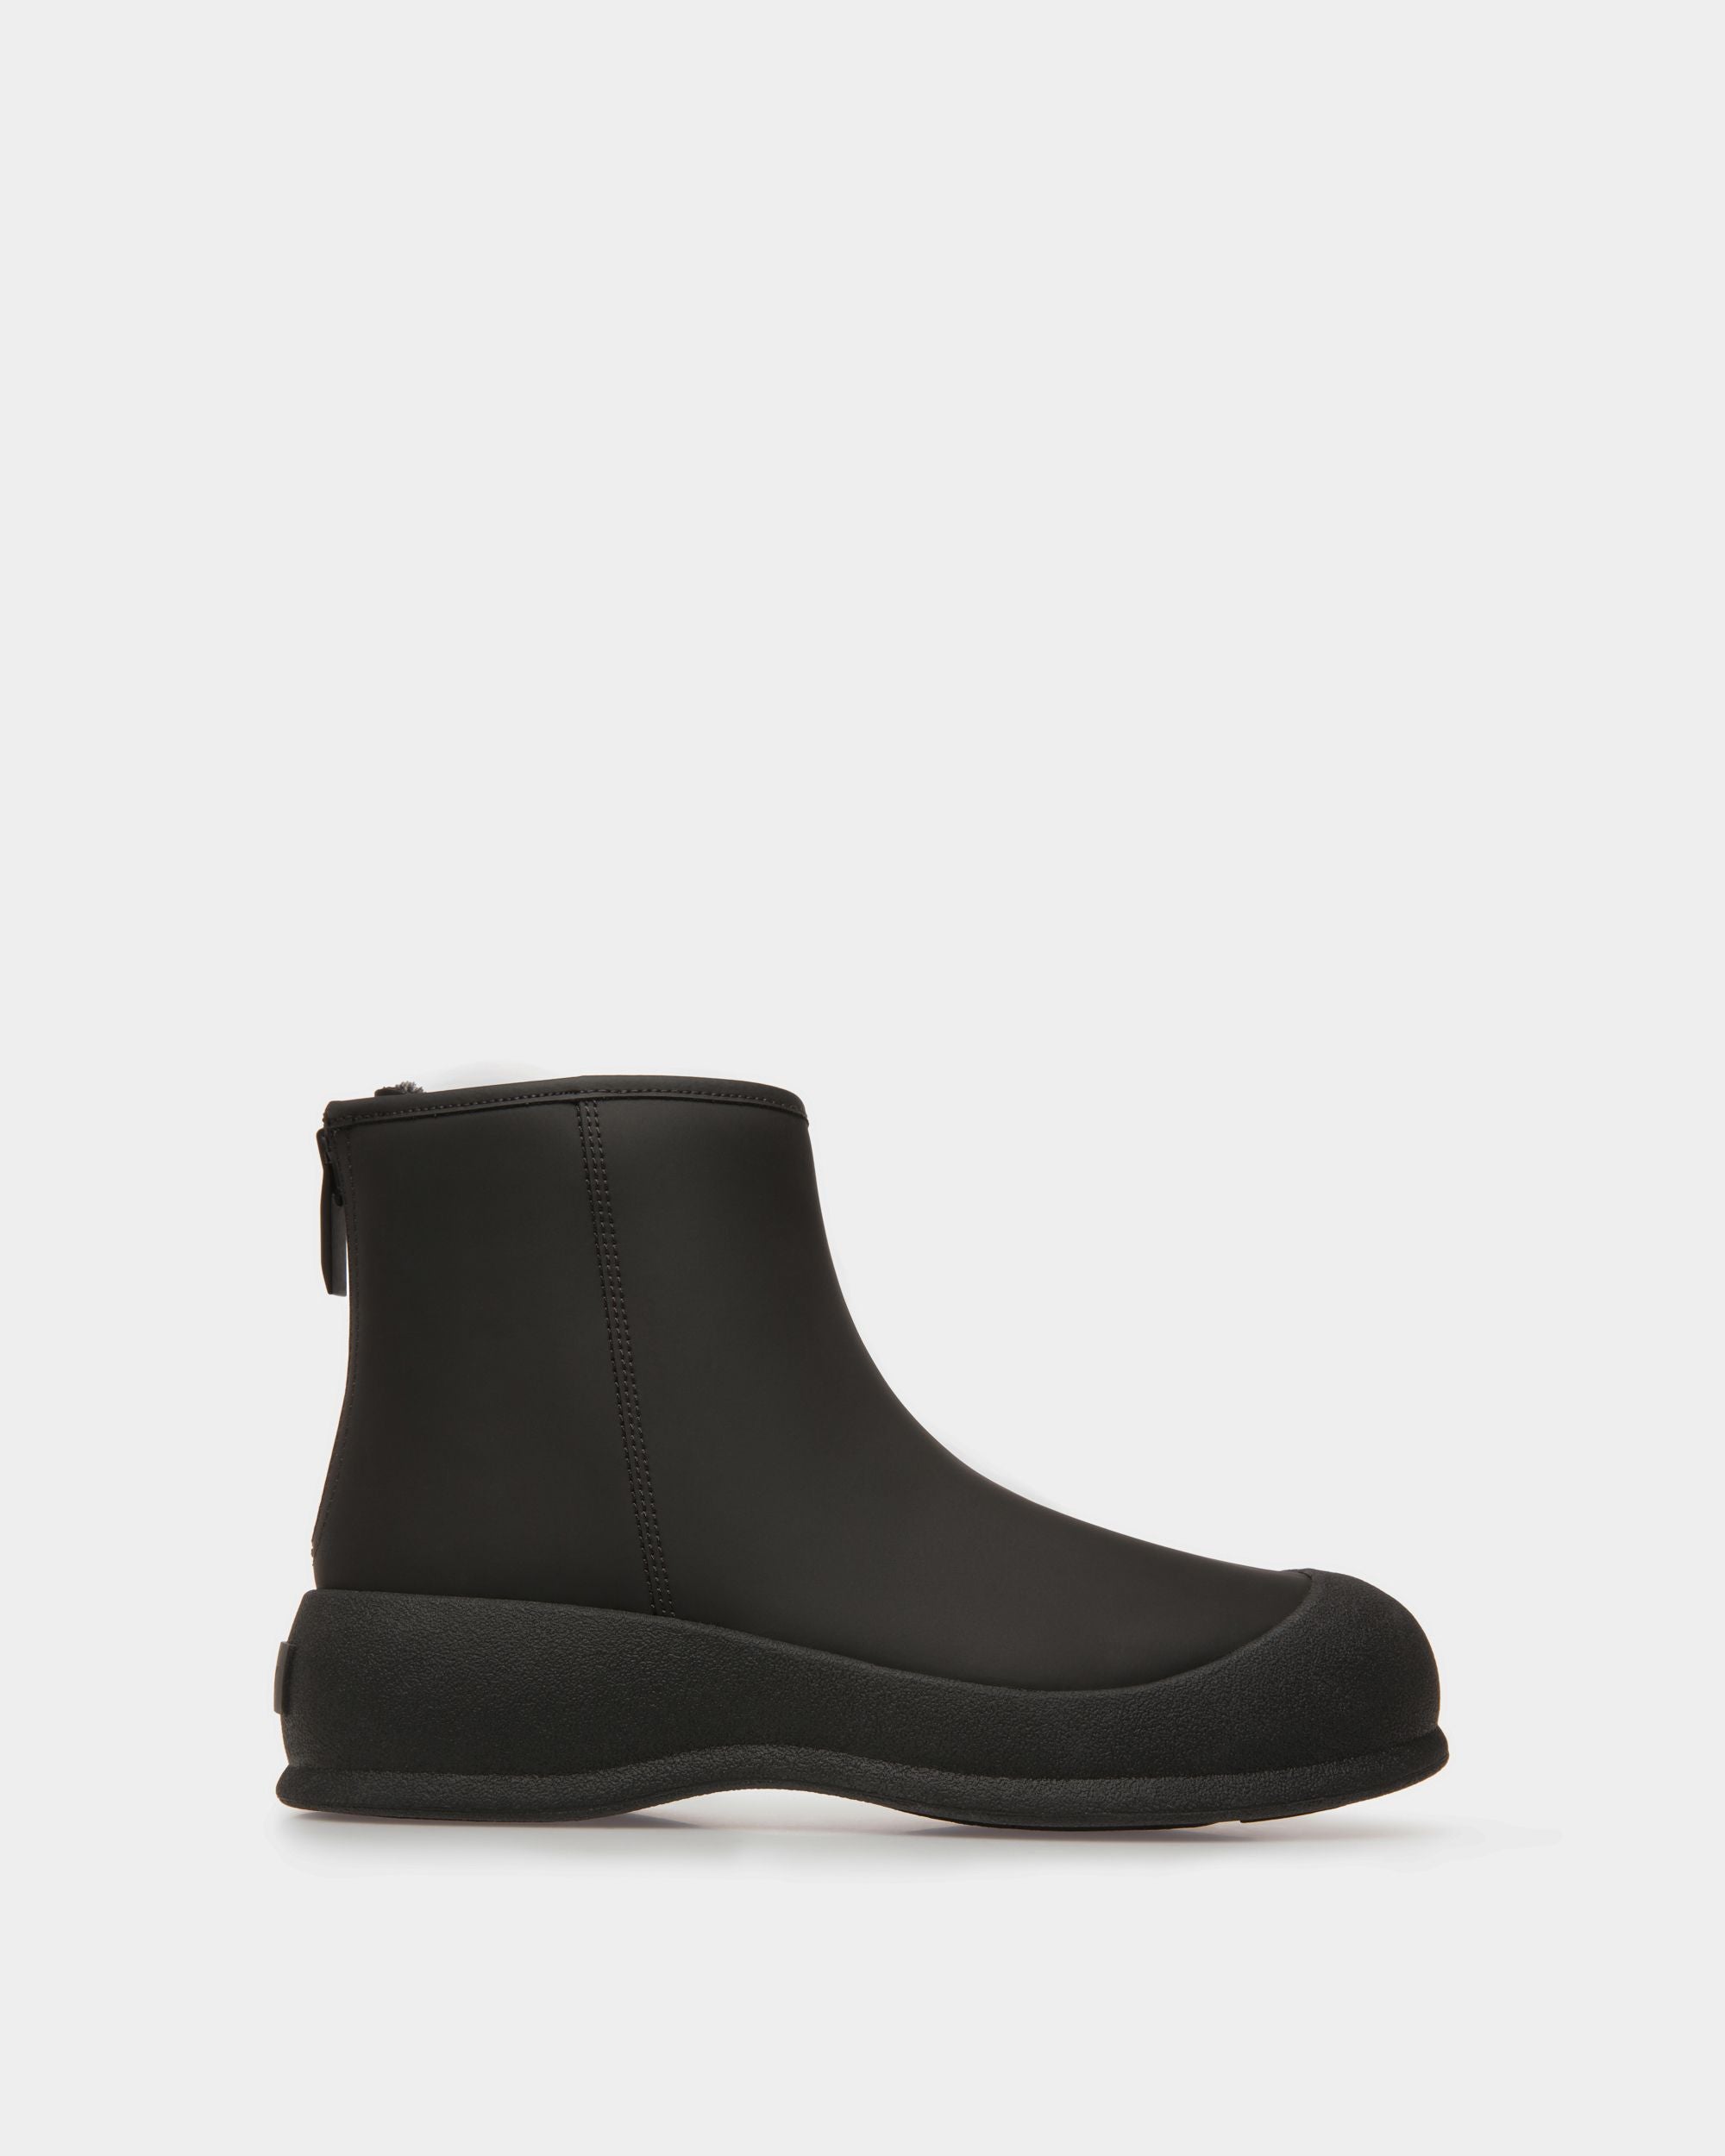 Carsey | Women's Boots | Black Leather | Bally | Still Life Side